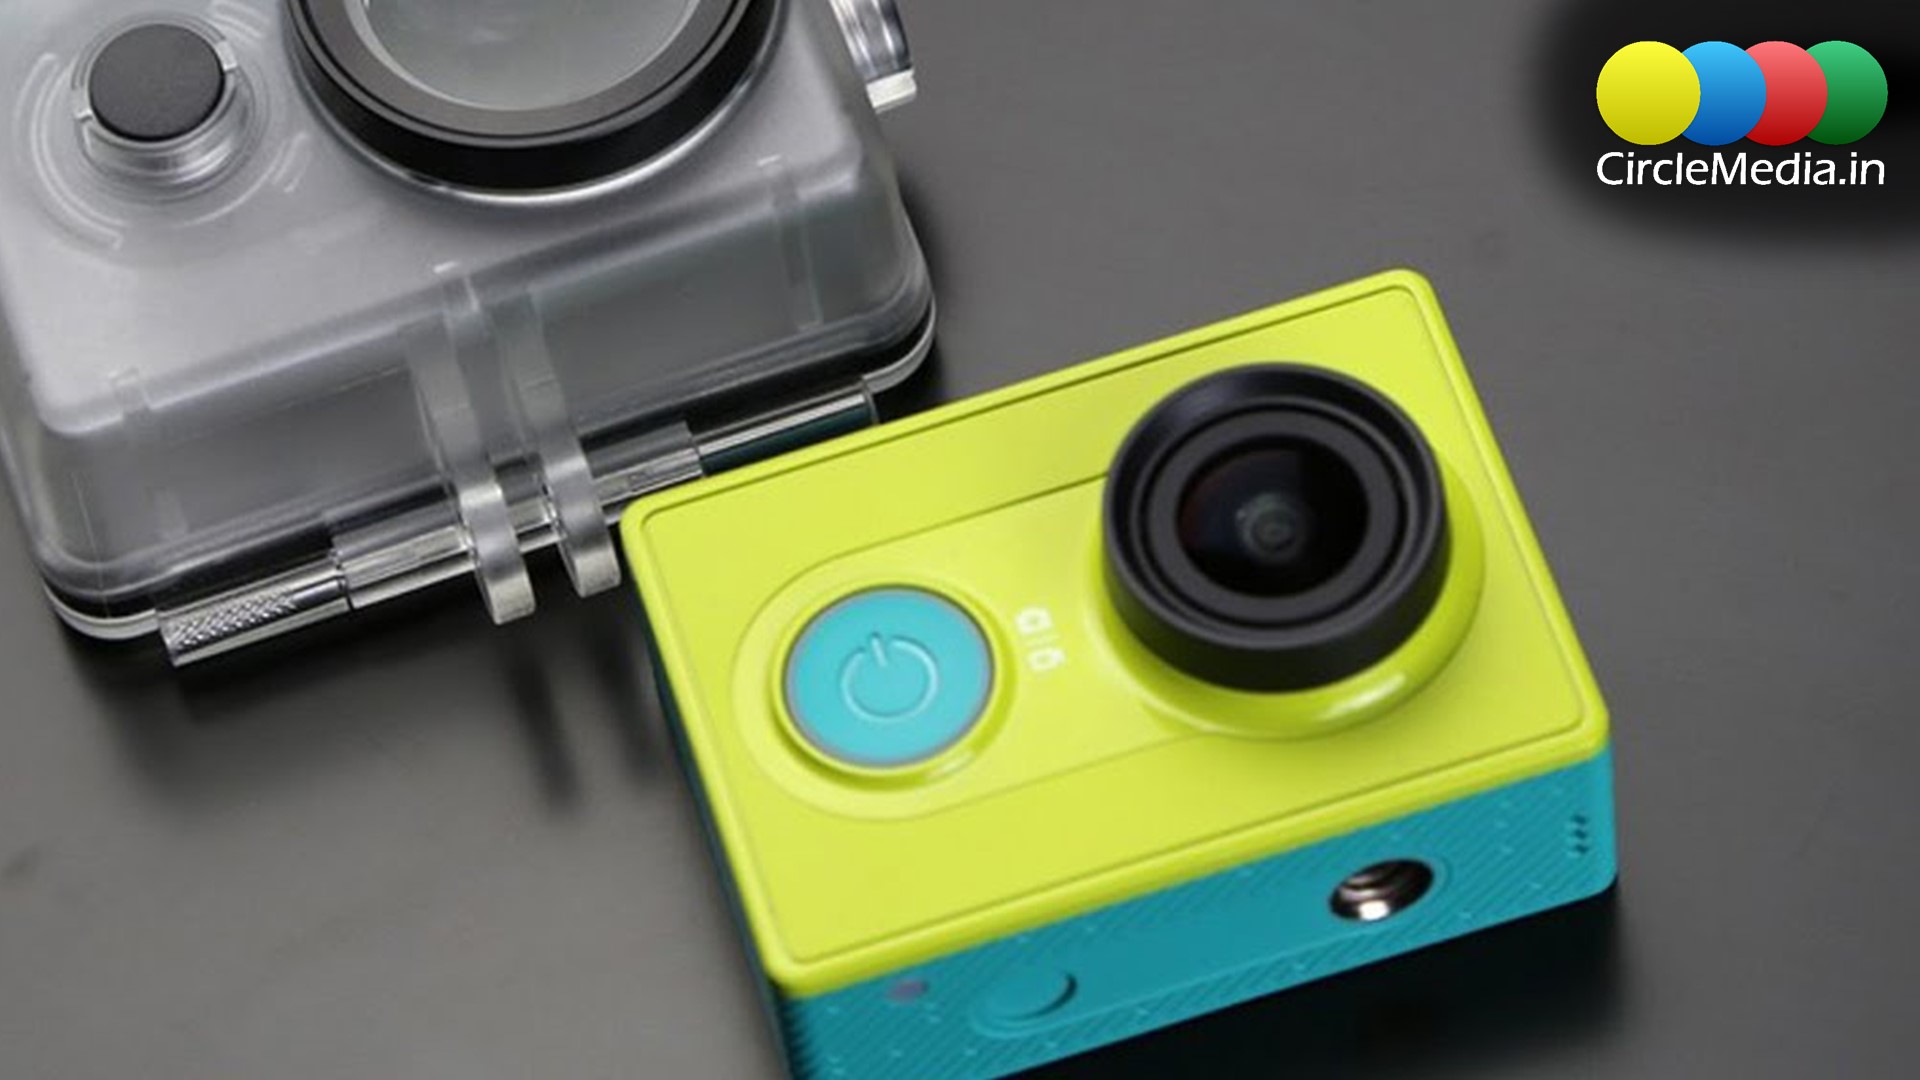 XiaoMi Yi Action Camera Review, Best Action Cameras, GoPro Alternative Camera